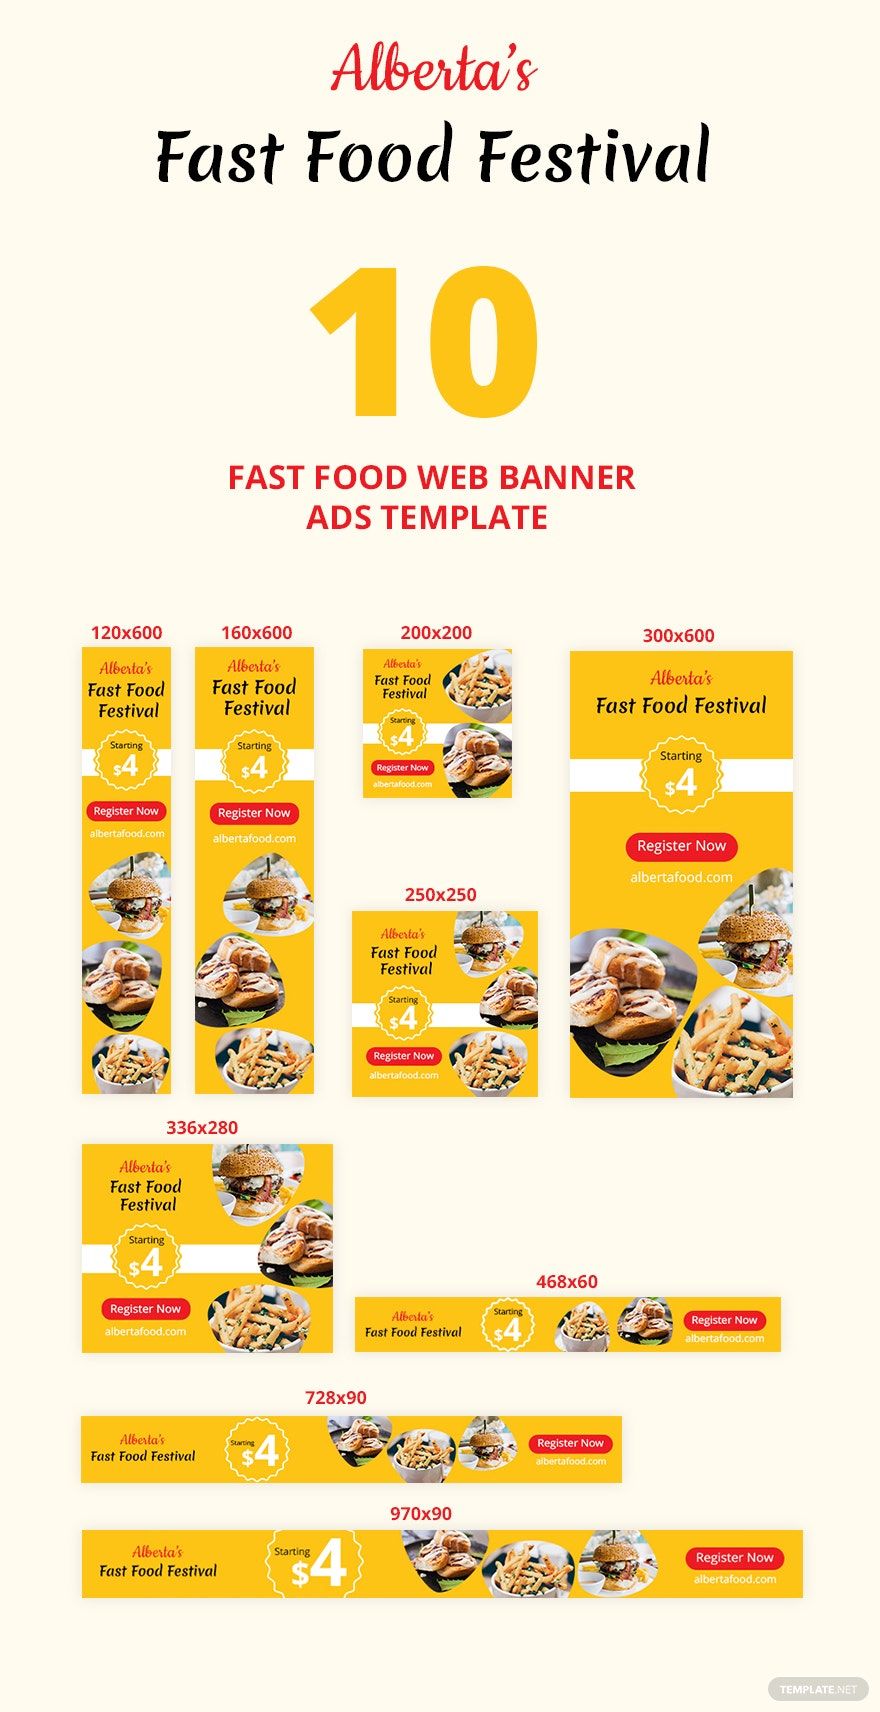 Free Fast Food Web Banner Ads Template